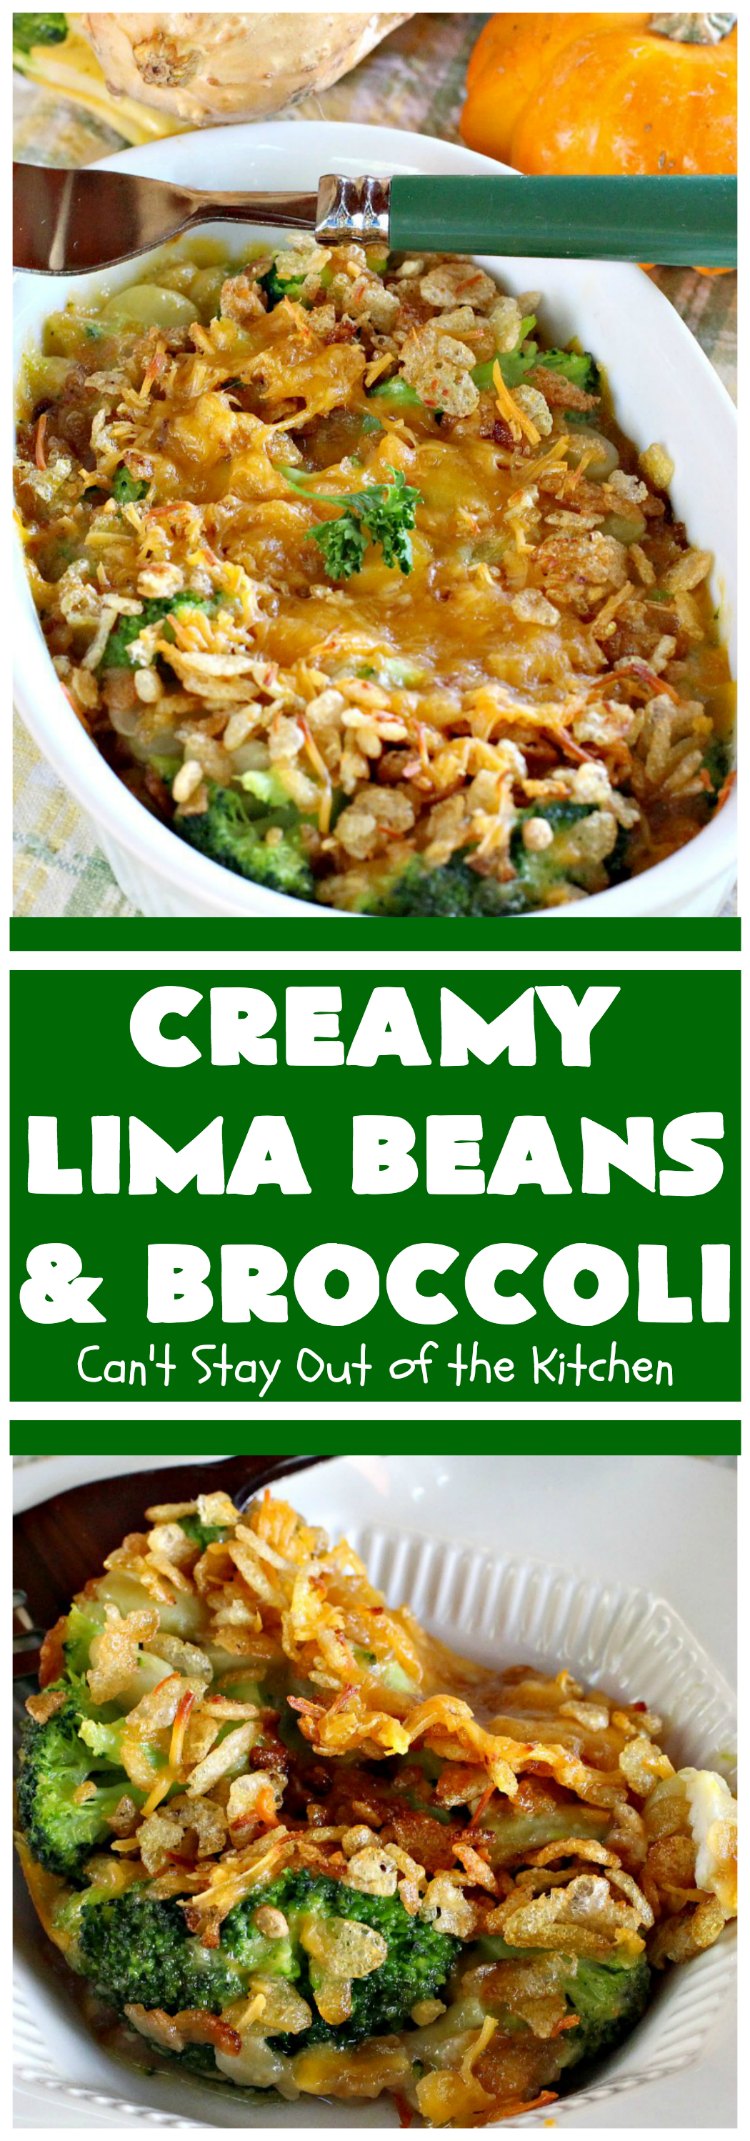 Creamy Lima Beans and Broccoli | Can't Stay Out of the Kitchen